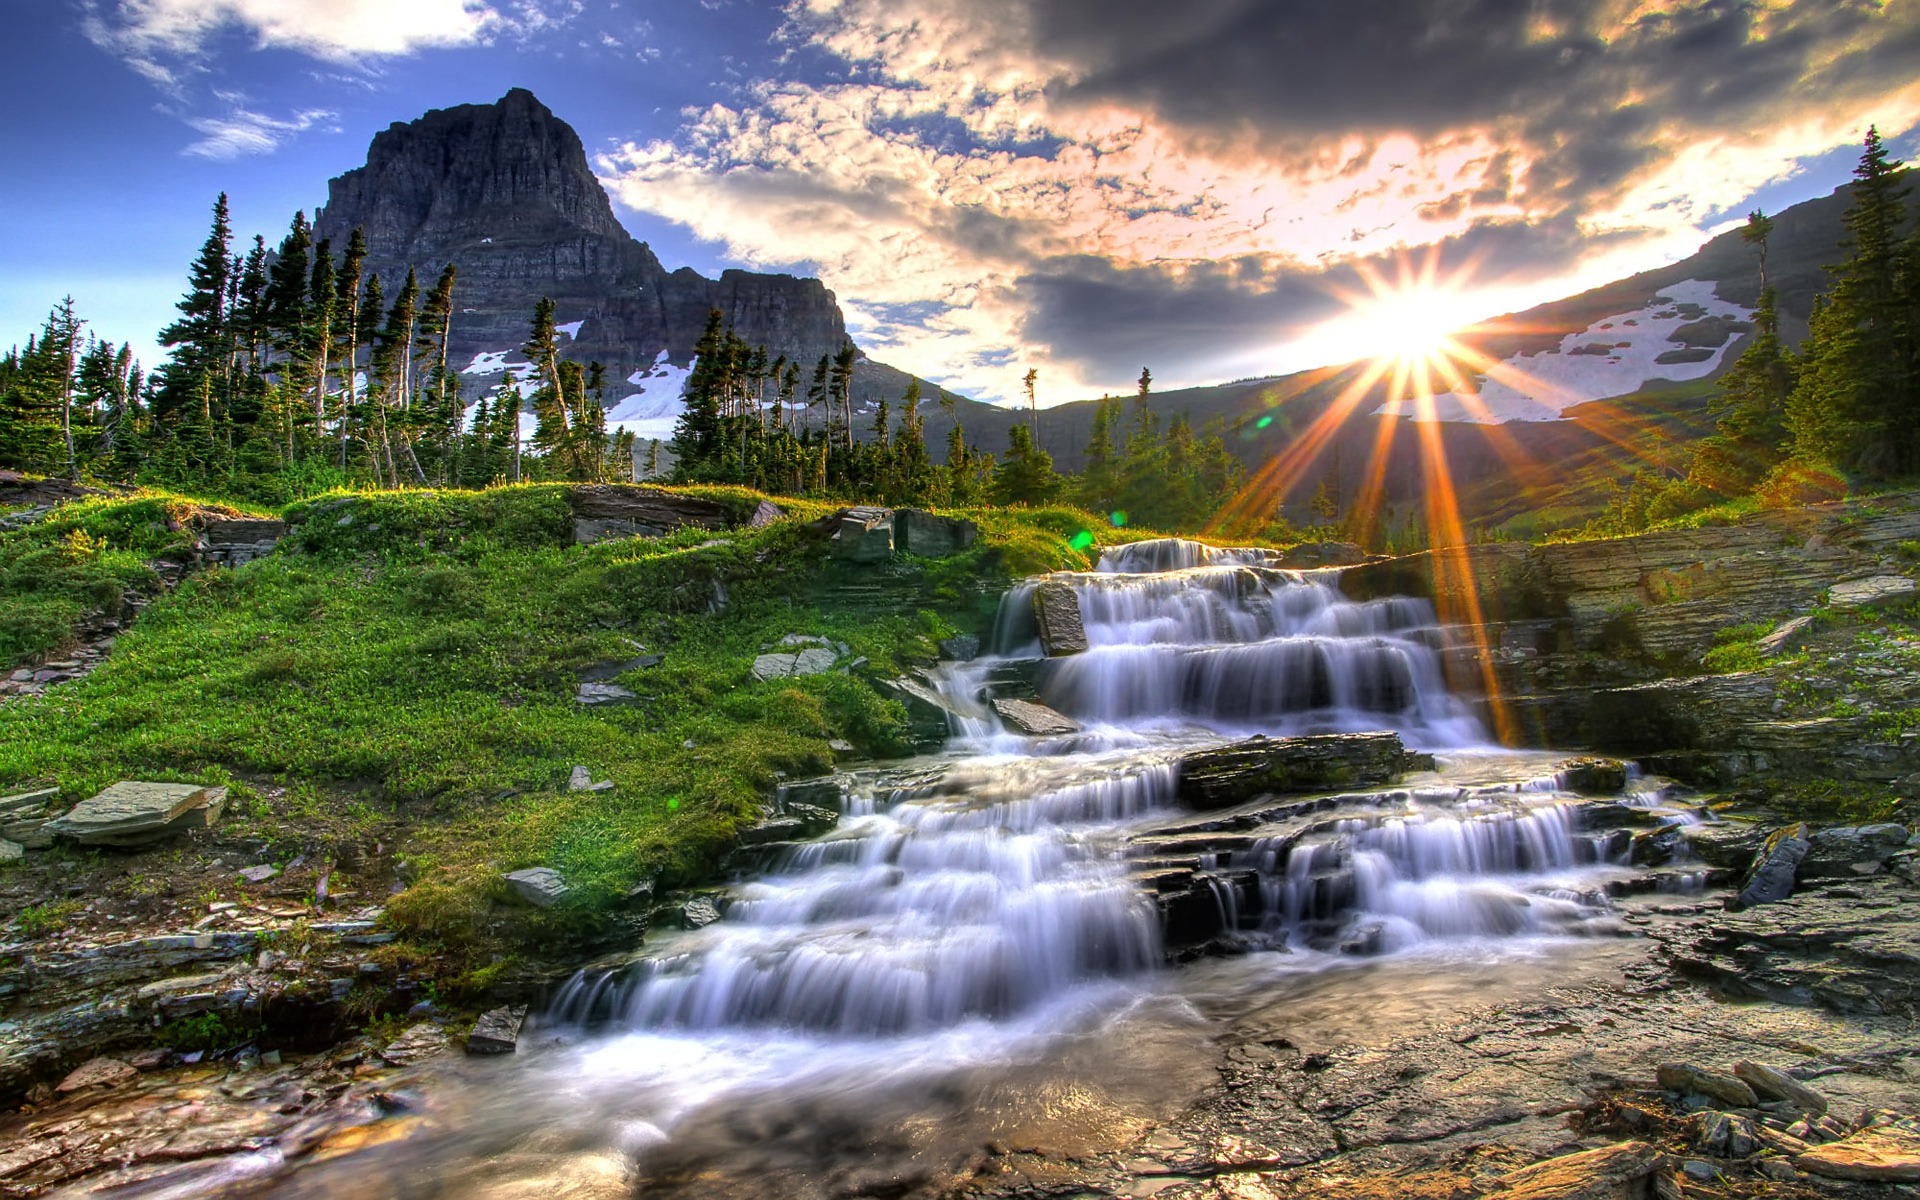 Waterfall Fantasy Wallpaper High Resolution HD Image 1920x1200 for